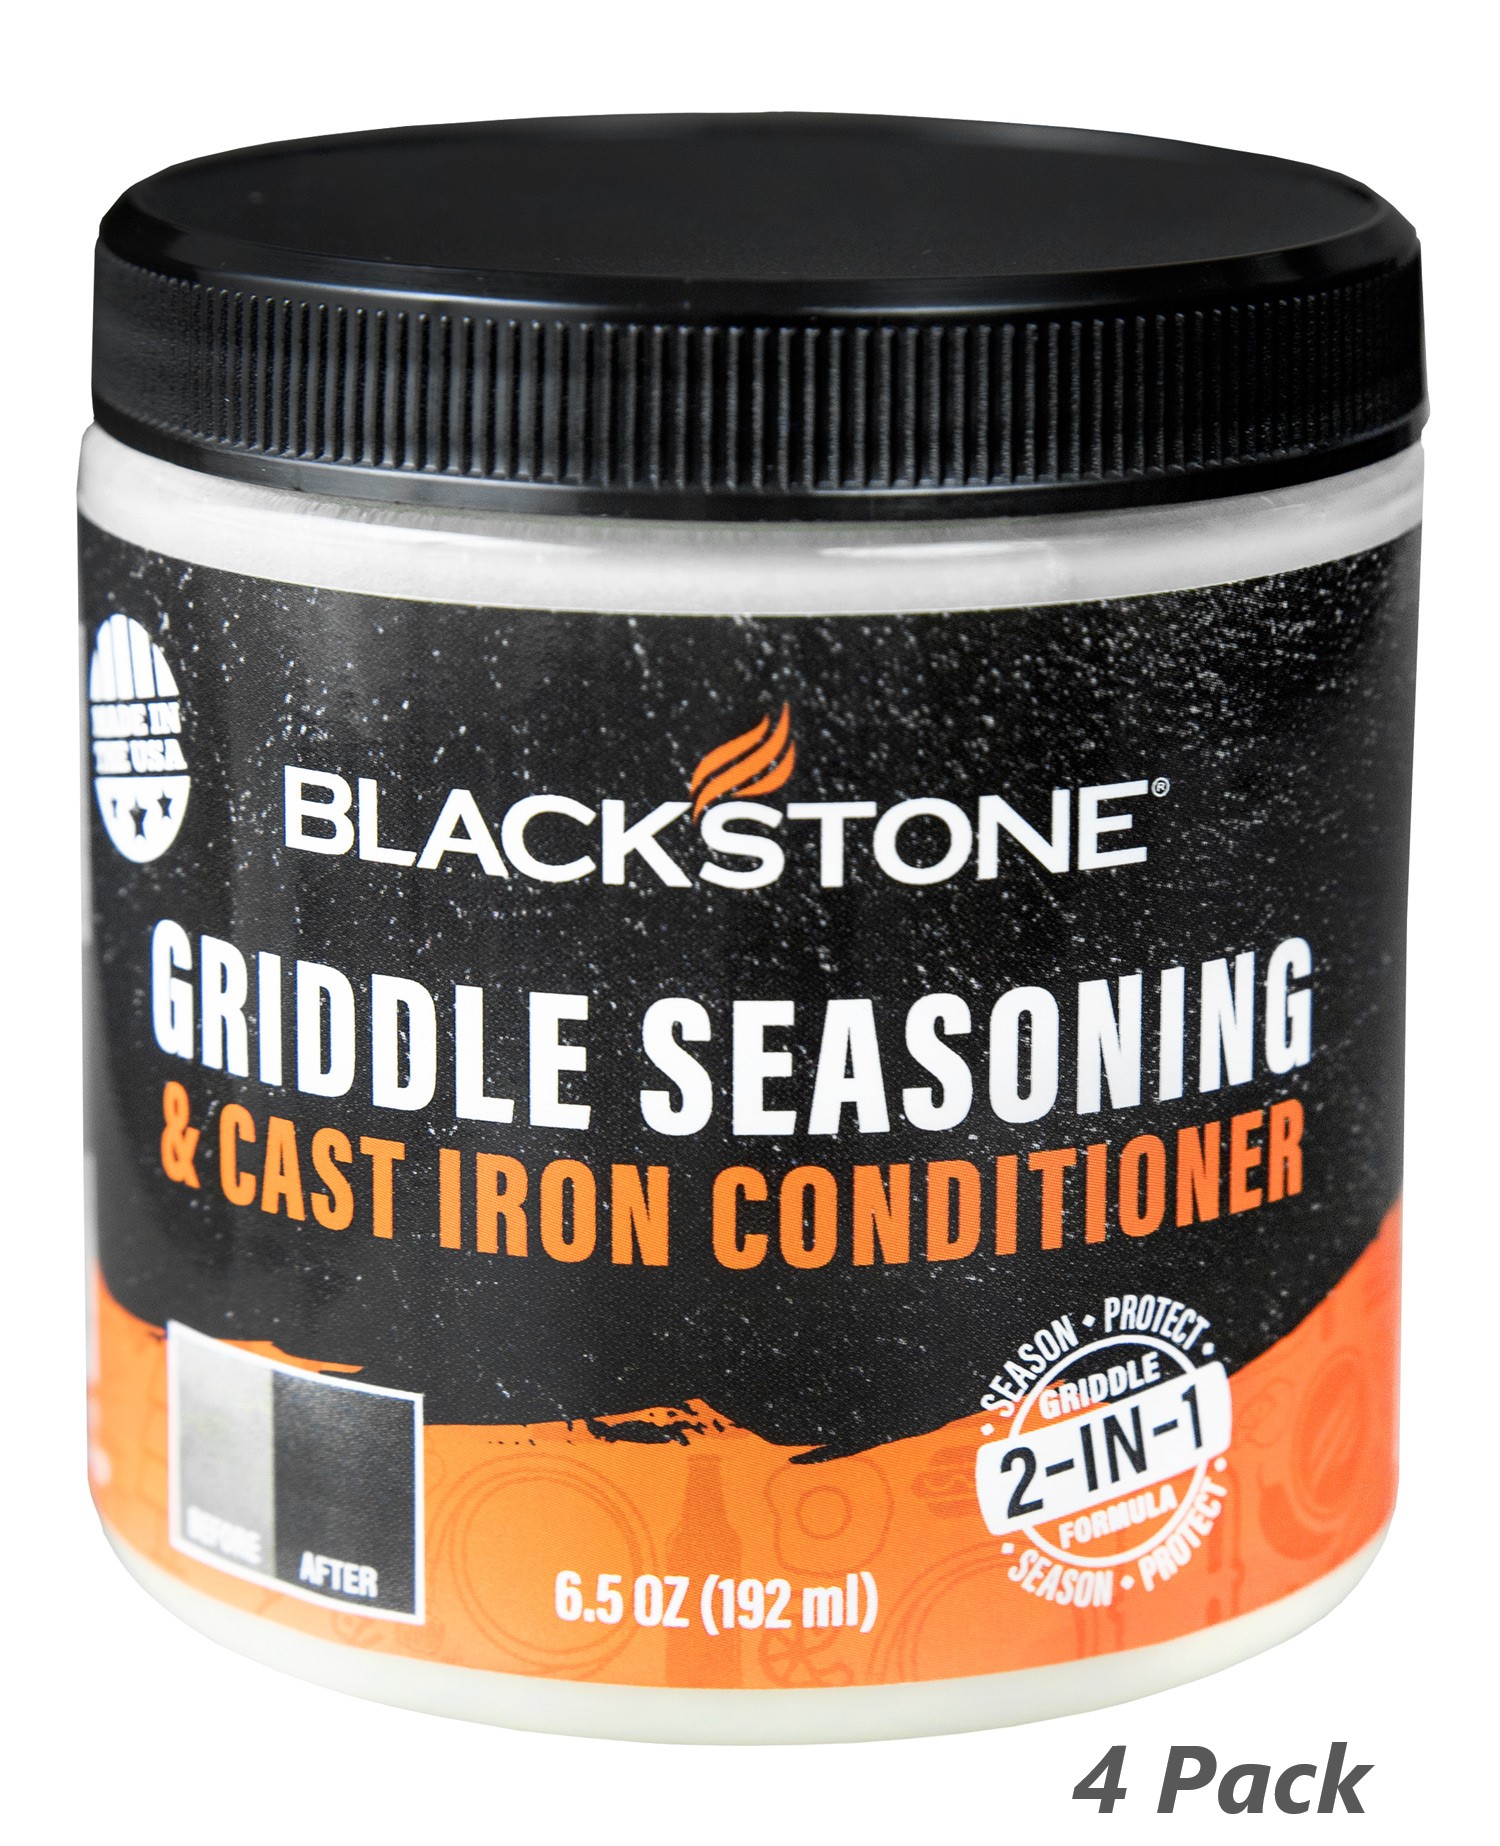 (4 Pack) Blackstone Griddle Seasoning and Cast Iron Conditioner - image 1 of 9